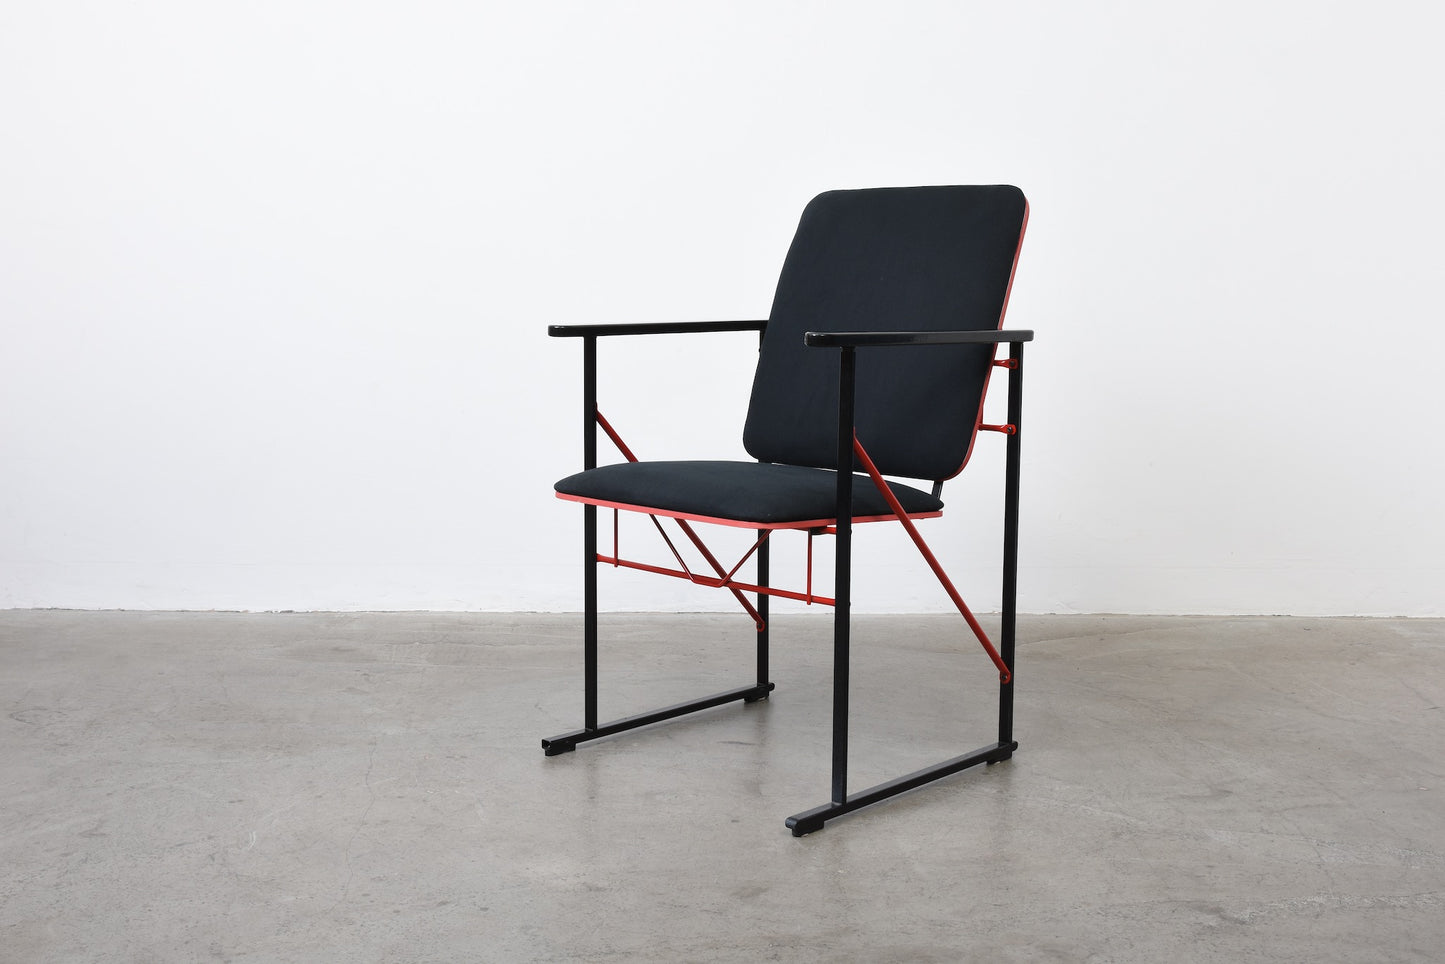 Two available: A500 armchairs by Yrjö Kukkapuro